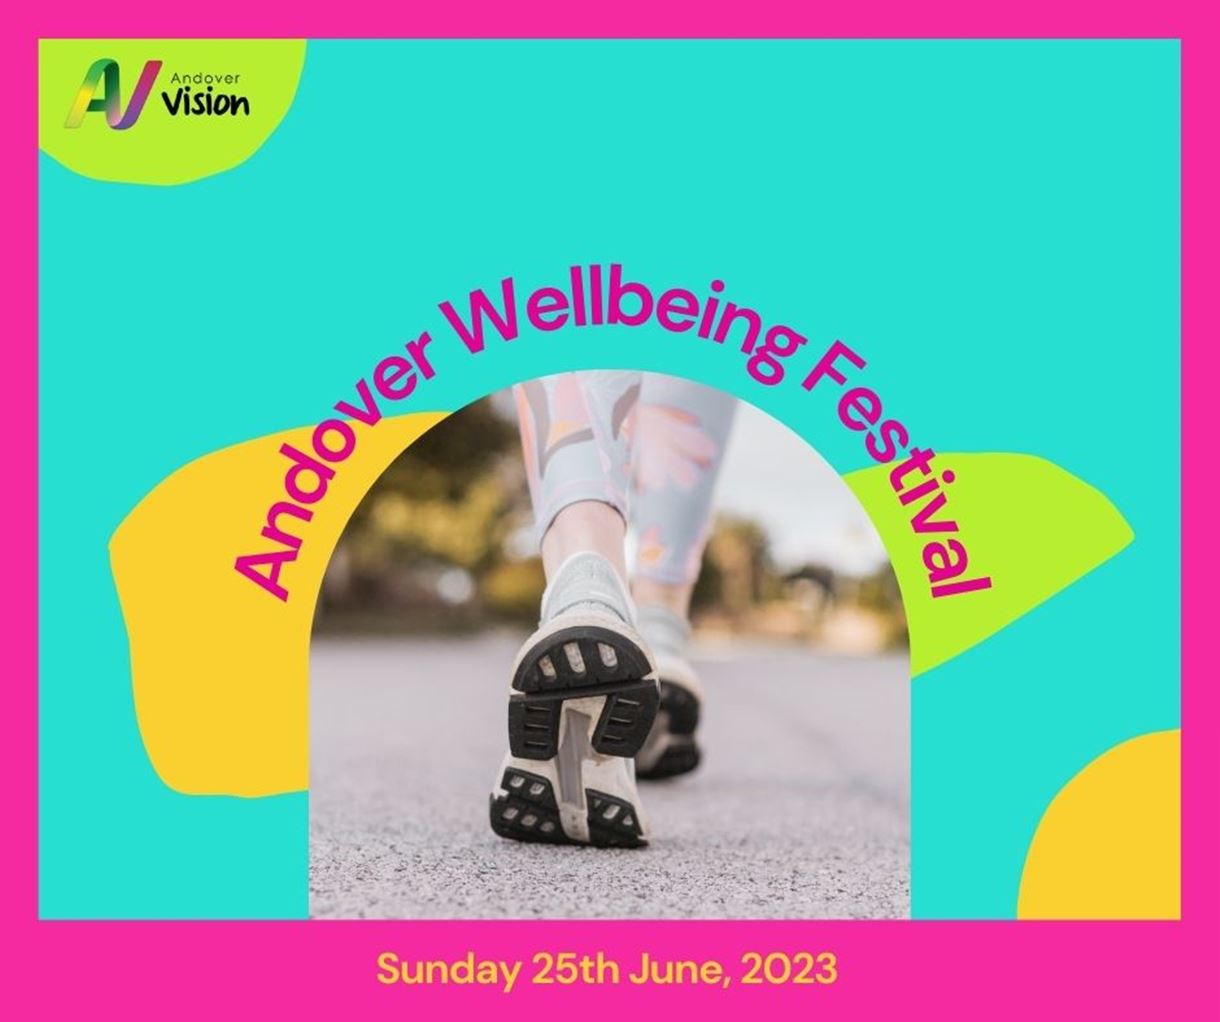 Andover Wellbeing Festival